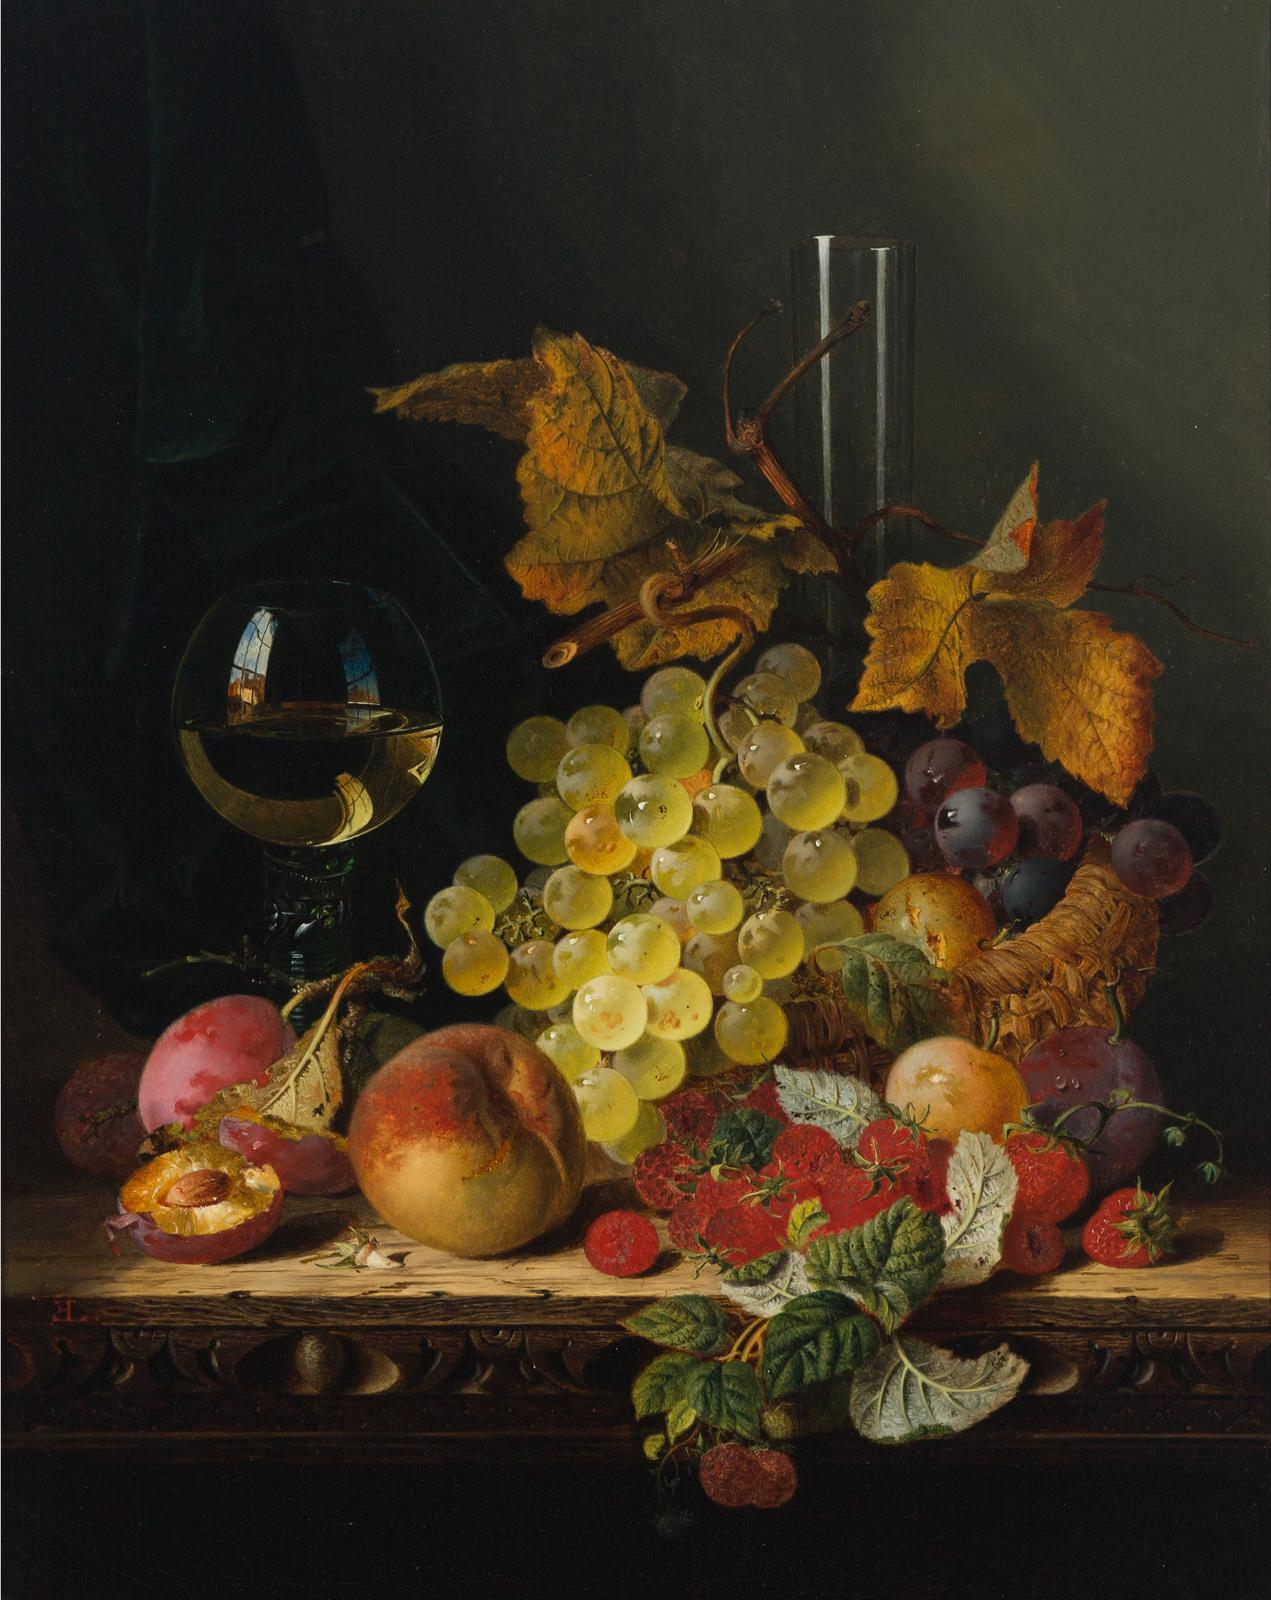 Edward Ladell (1821-1886) - Still Life Of Fruit In A Basket By A Goblet On A Ledge